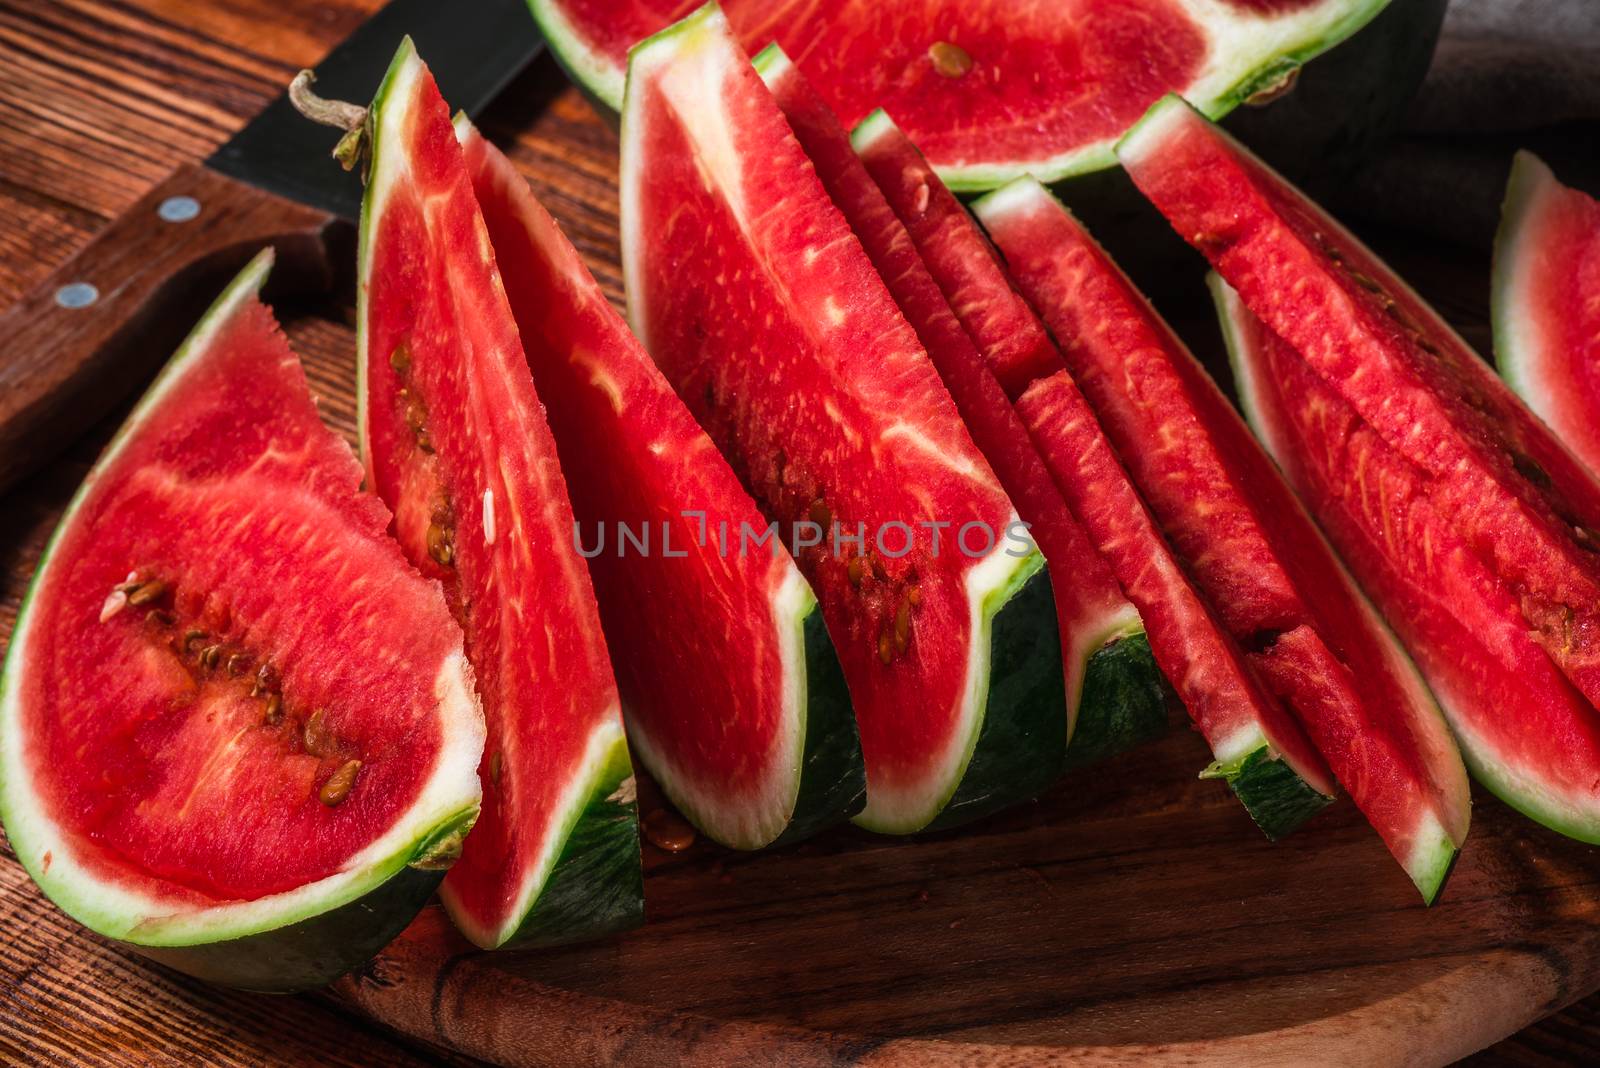 Slices of ripe and tasty watermelon lying on the board